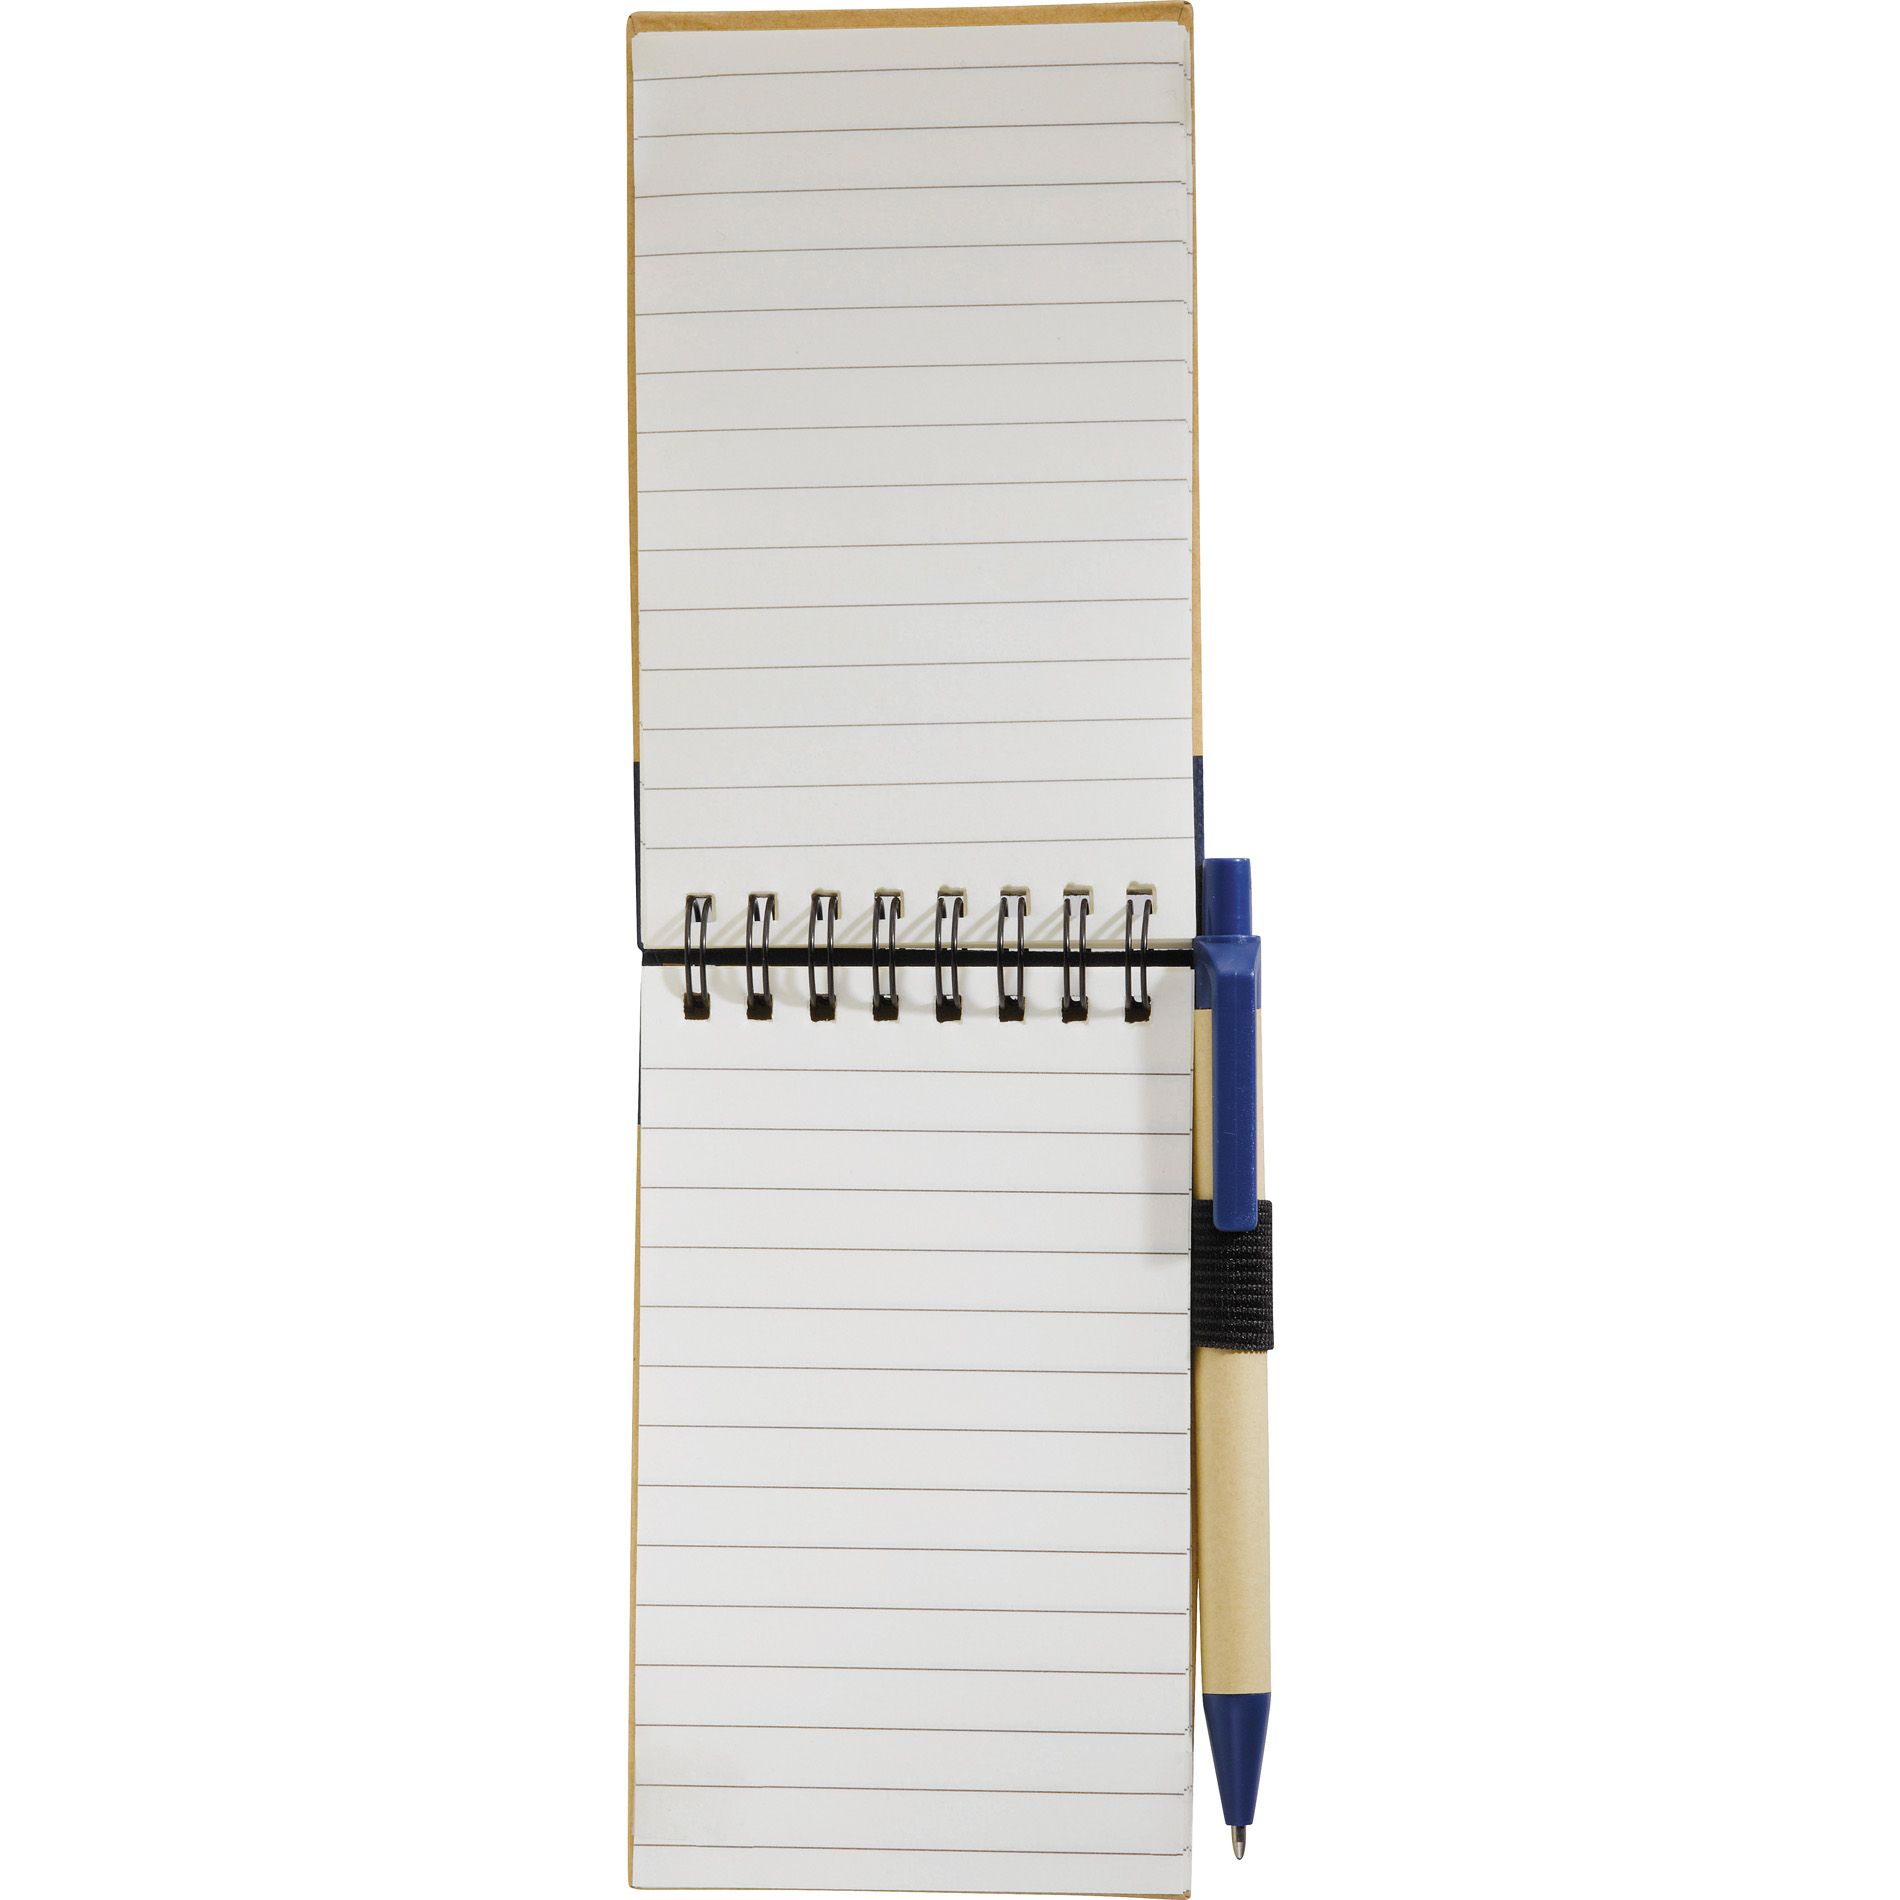 Recycled notebook and pen set recycled promotional product